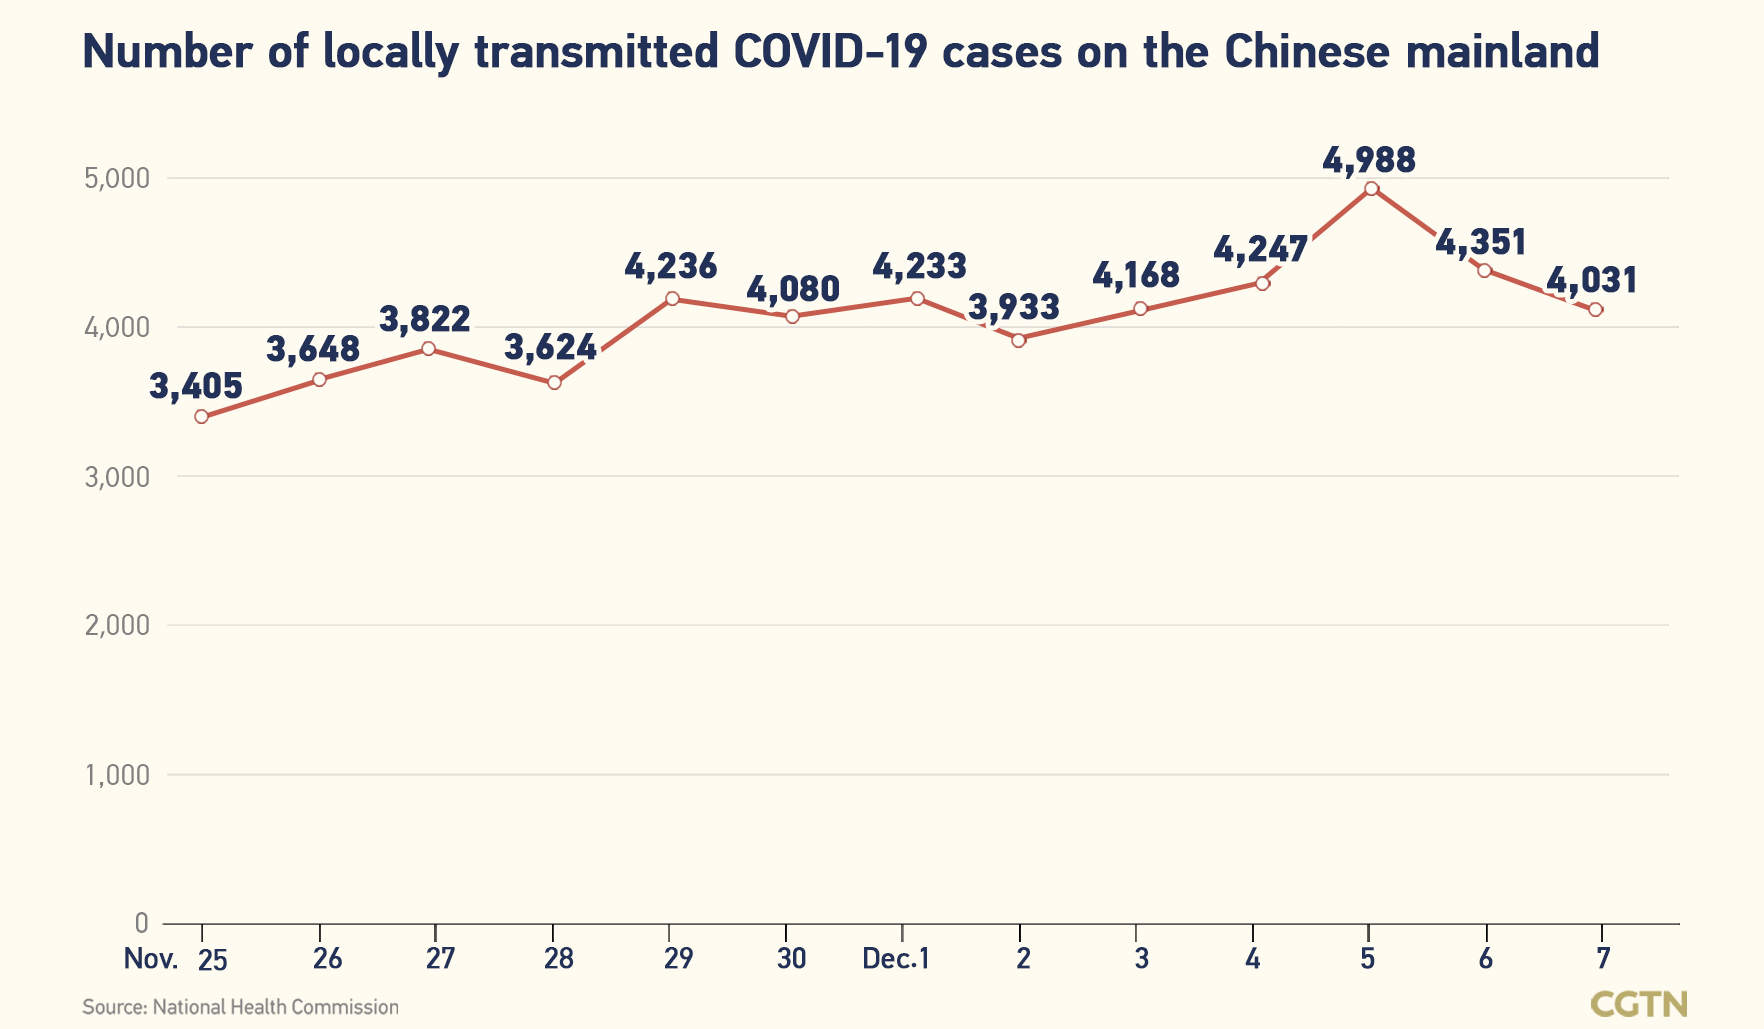 Chinese mainland records 4,079 new confirmed COVID-19 cases